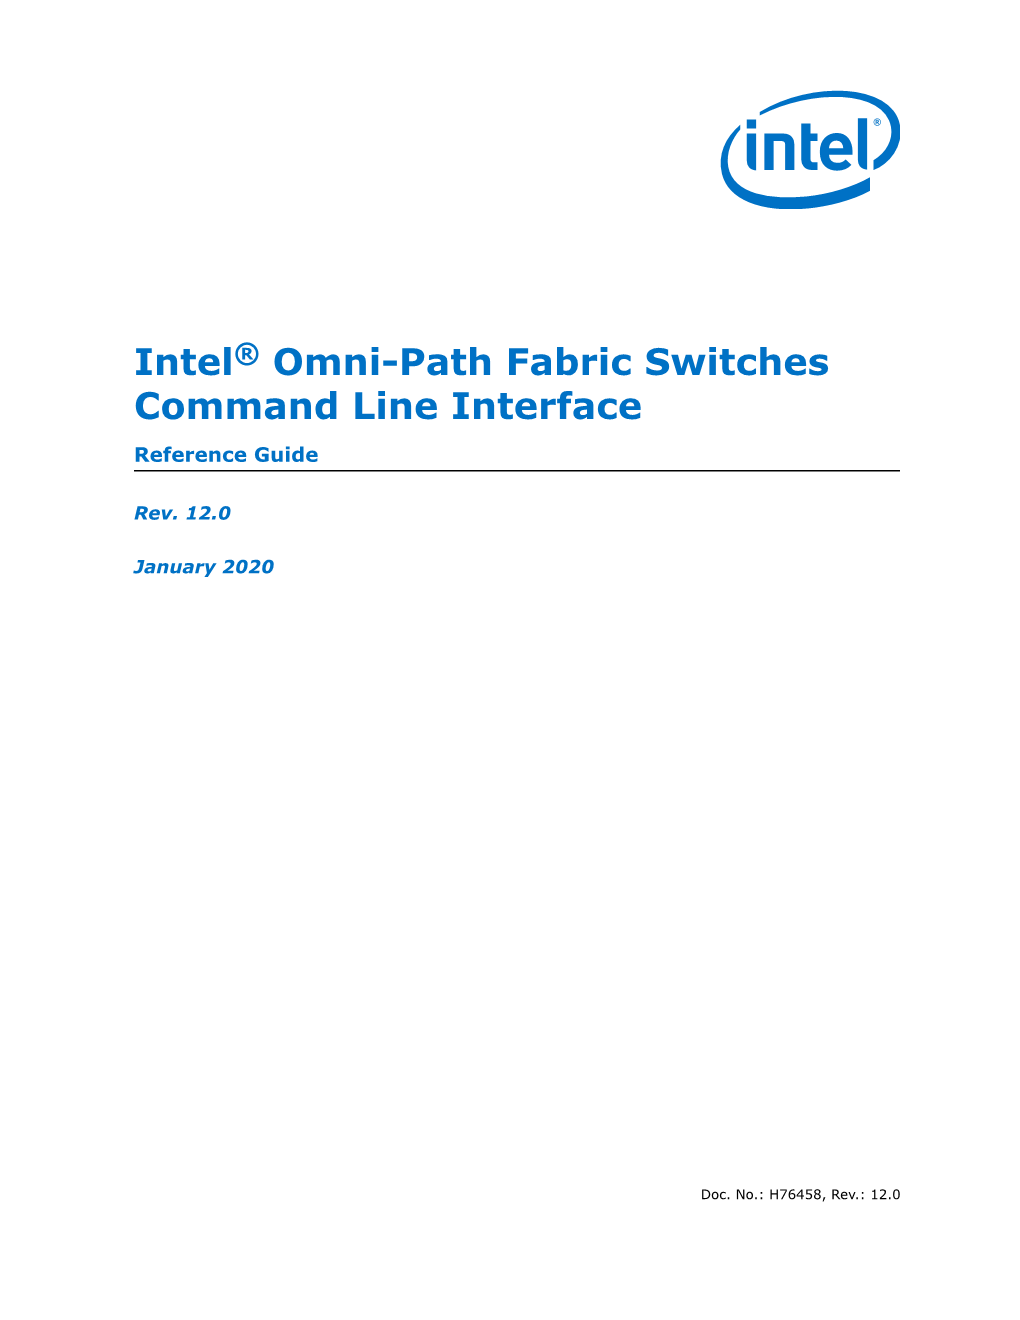 Intel® Omni-Path Fabric Switches Command Line Interface Reference Guide